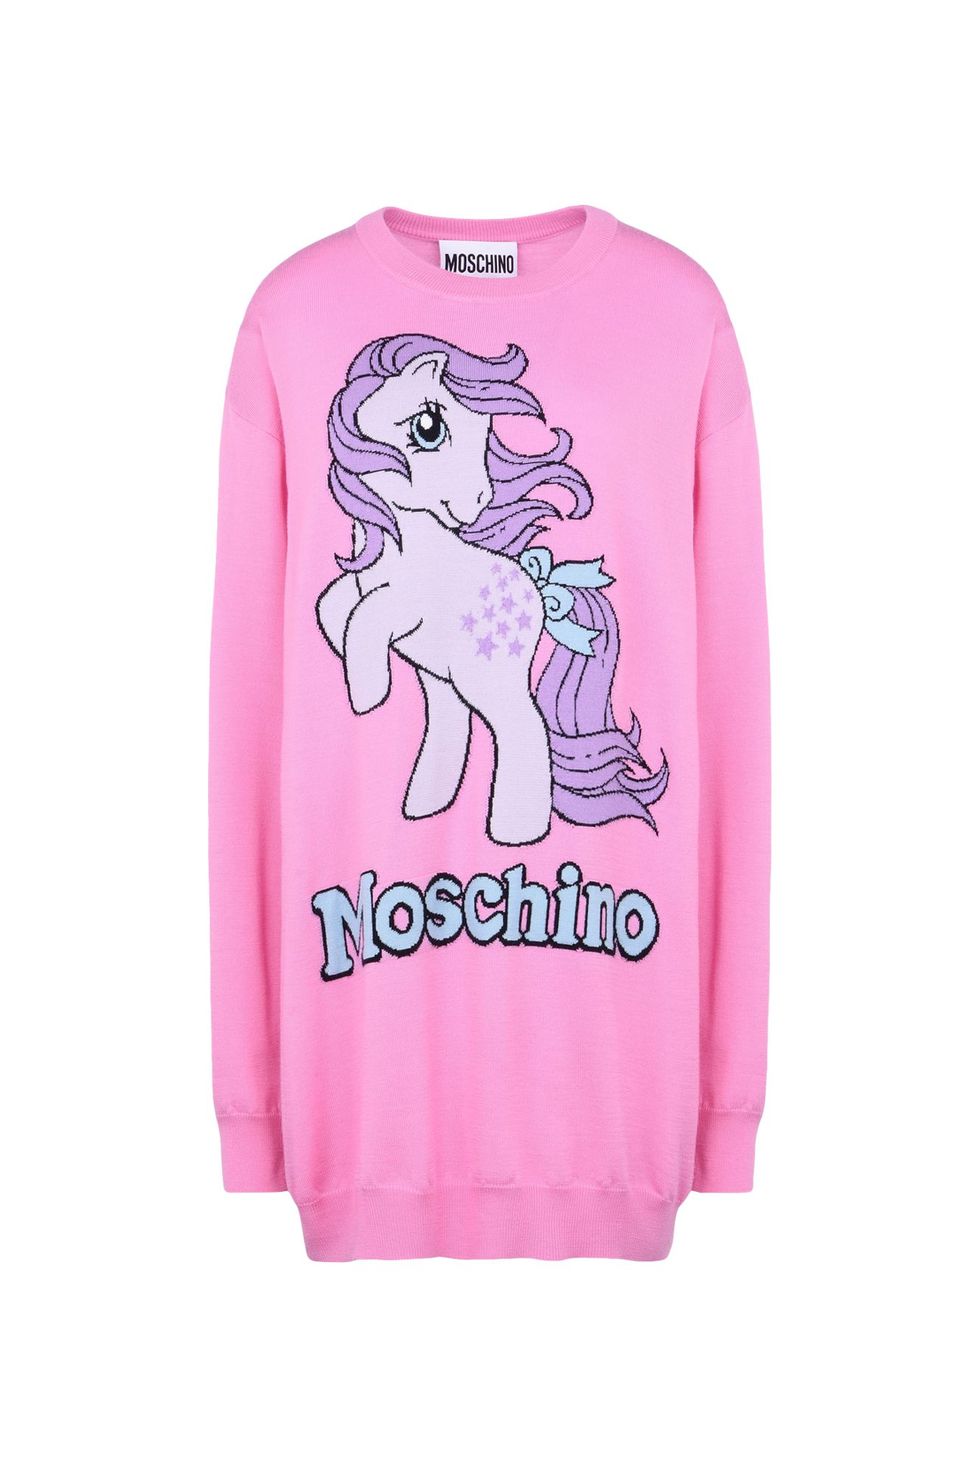 Clothing, Pink, White, Product, Sleeve, Sweatshirt, T-shirt, Top, Fictional character, Outerwear, 